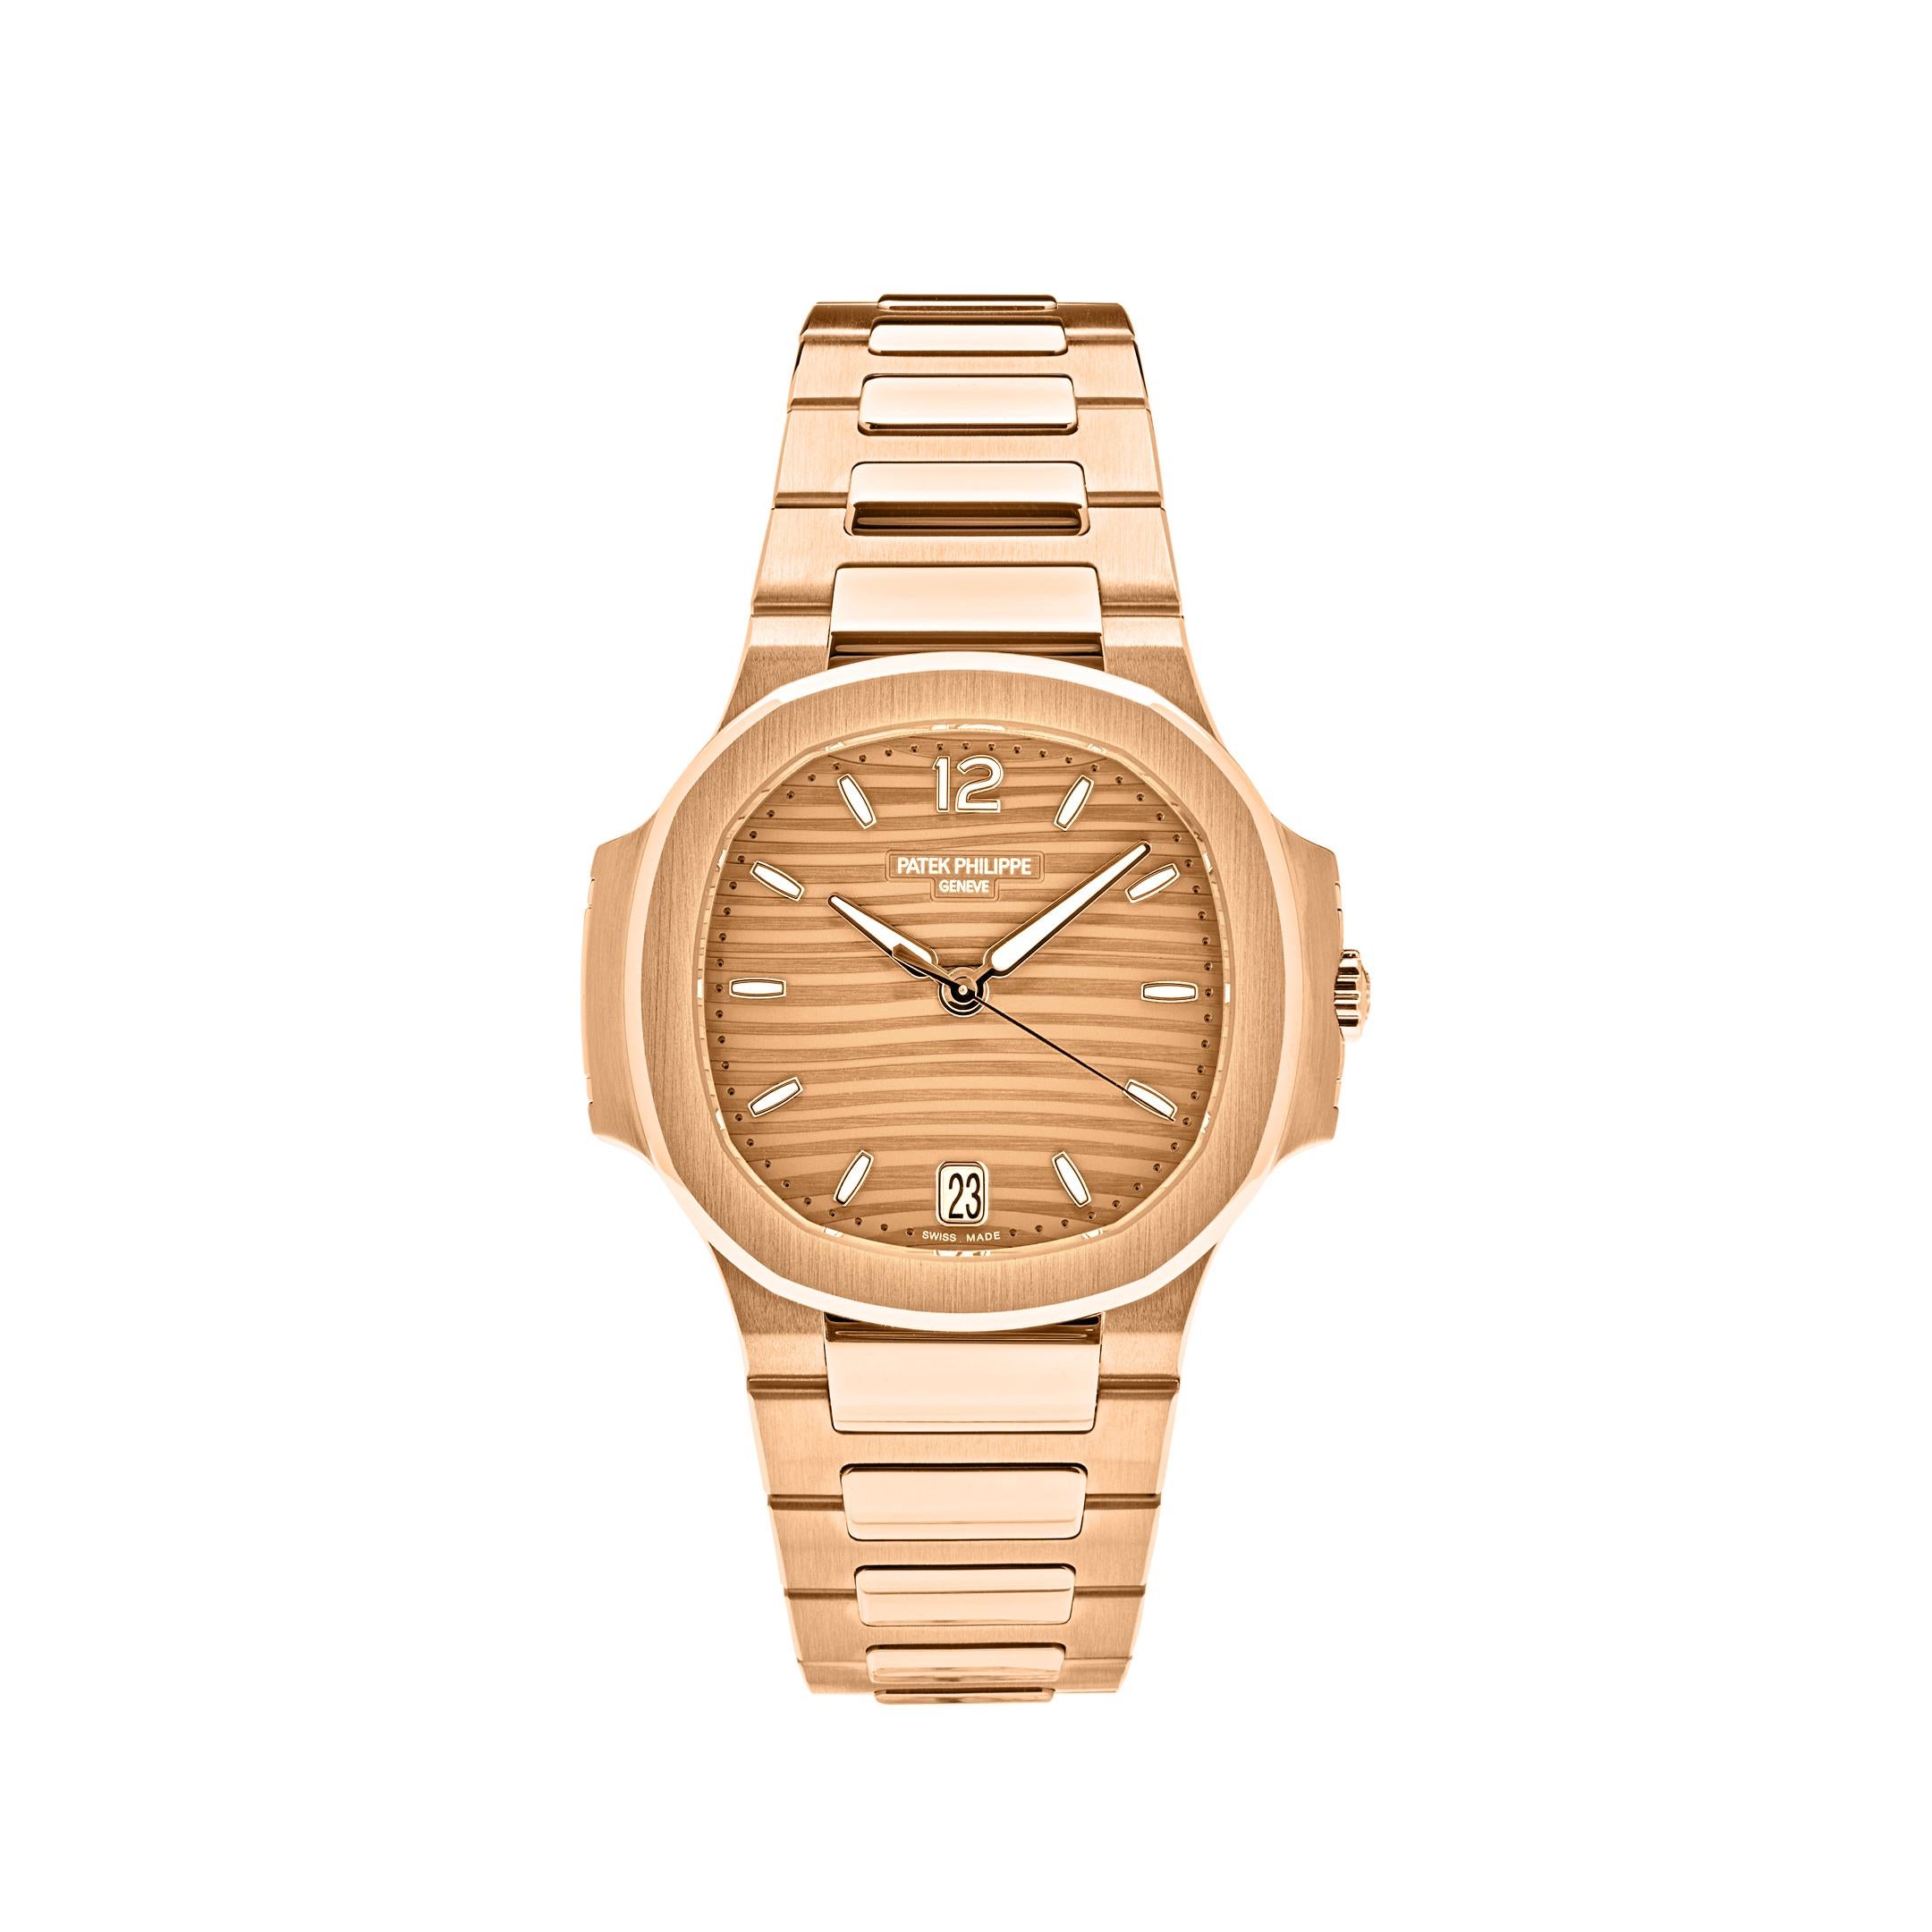 The Patek Philippe Ladies Nautilus features a satin-finished bezel and 35mm 18k rose gold case. In the center, lays a gold embossed dial with luminous applied numerals and hour markers. This beautiful timepiece comes on a rose gold bracelet and